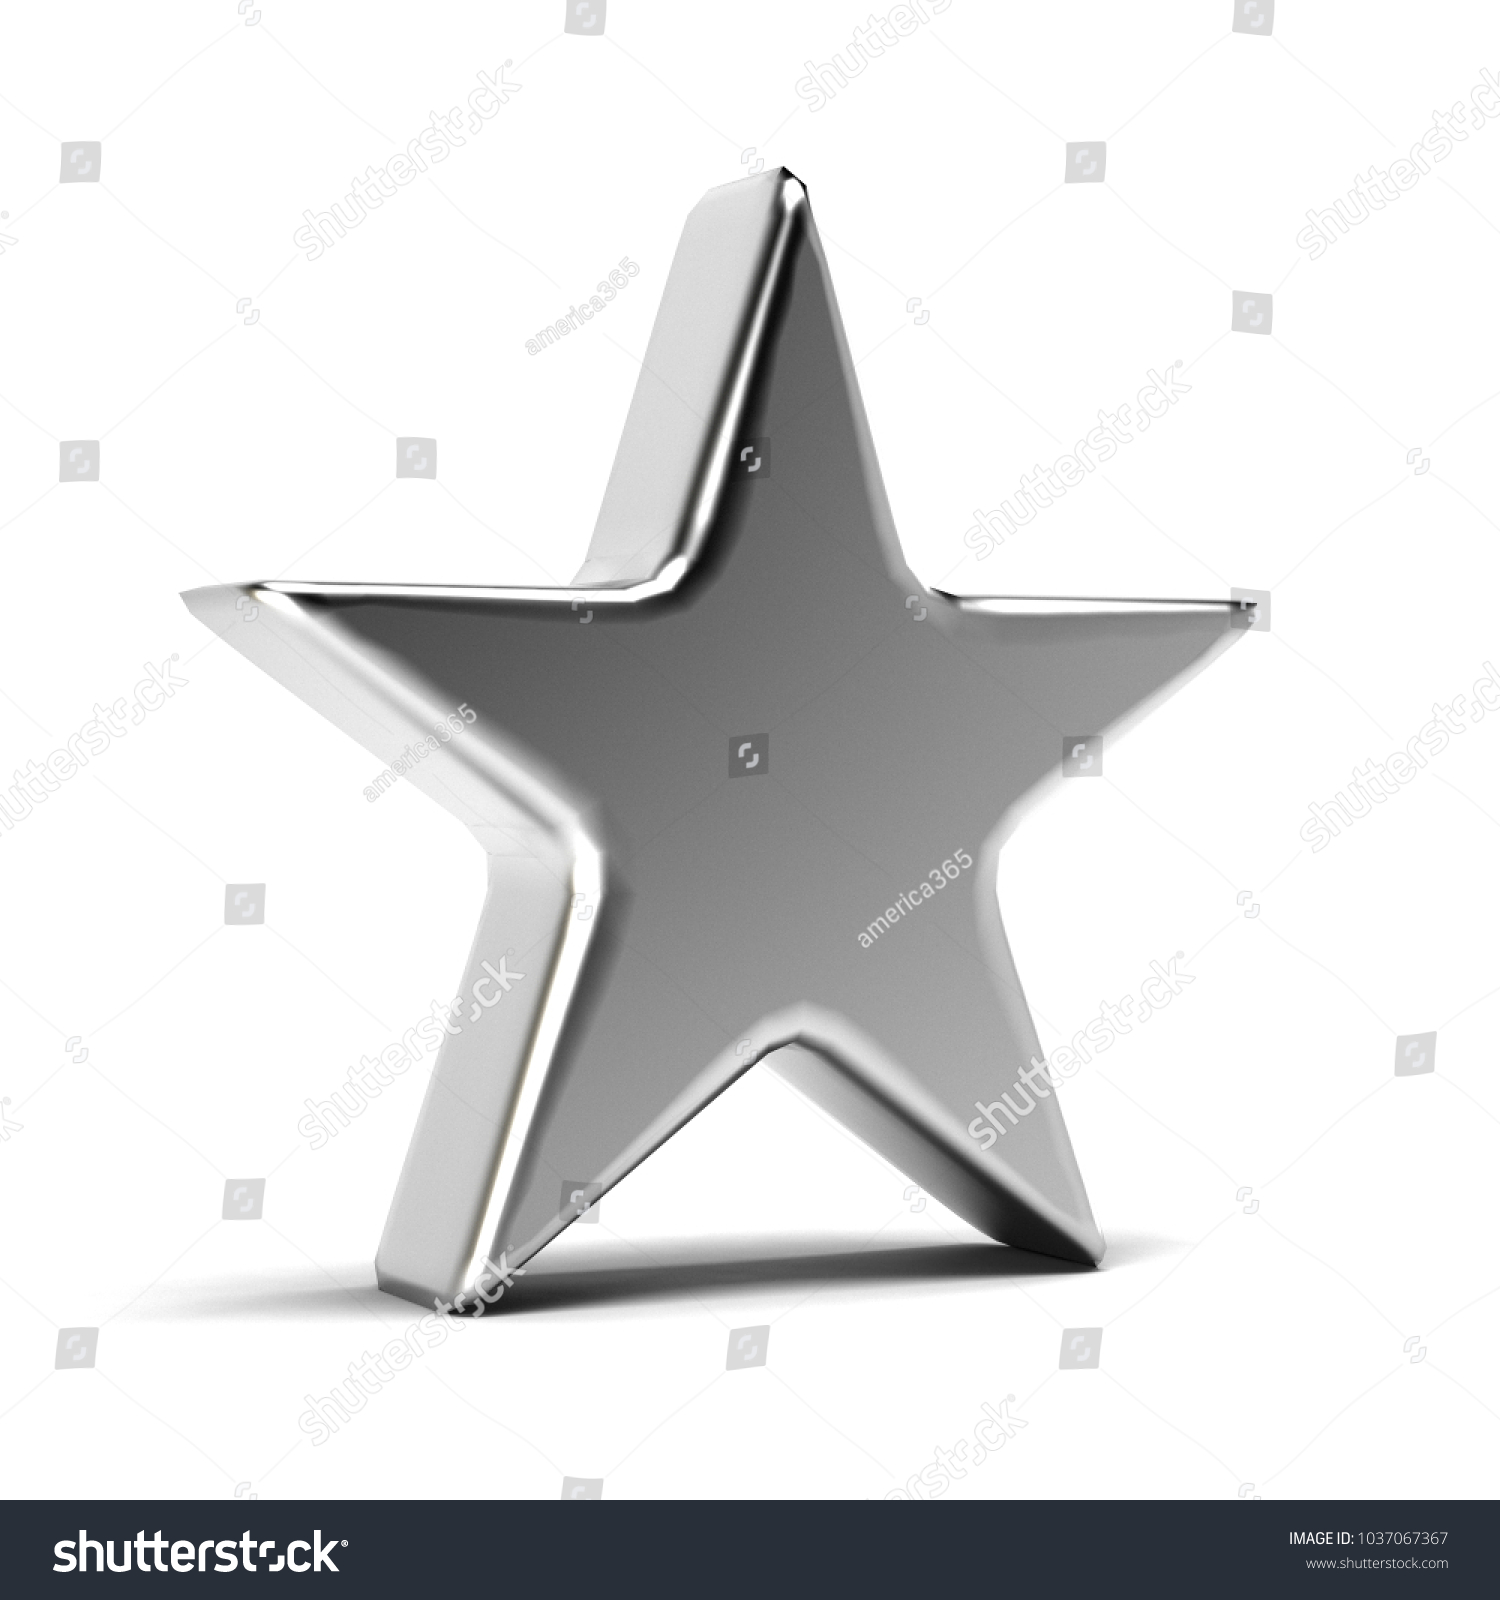 Silver Star Icon 3d Gold Render Stock Illustration 1037067367 ...